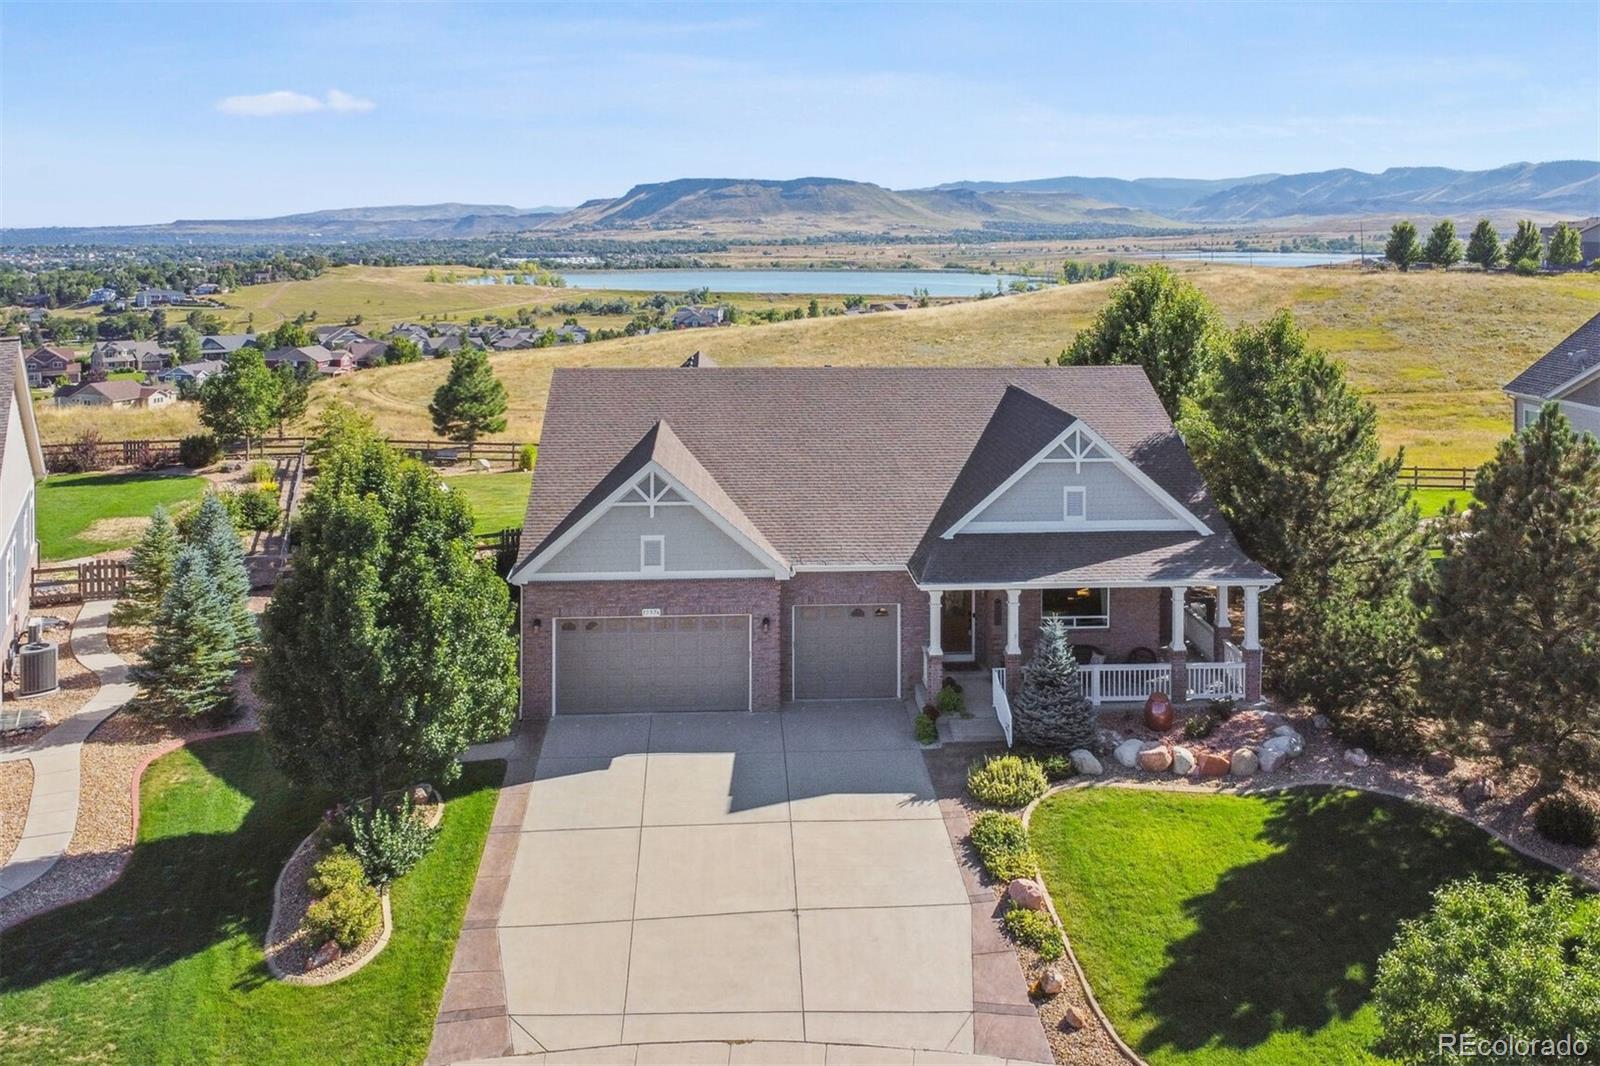 17376 W 77th Place, arvada MLS: 2592320 Beds: 4 Baths: 4 Price: $1,450,000